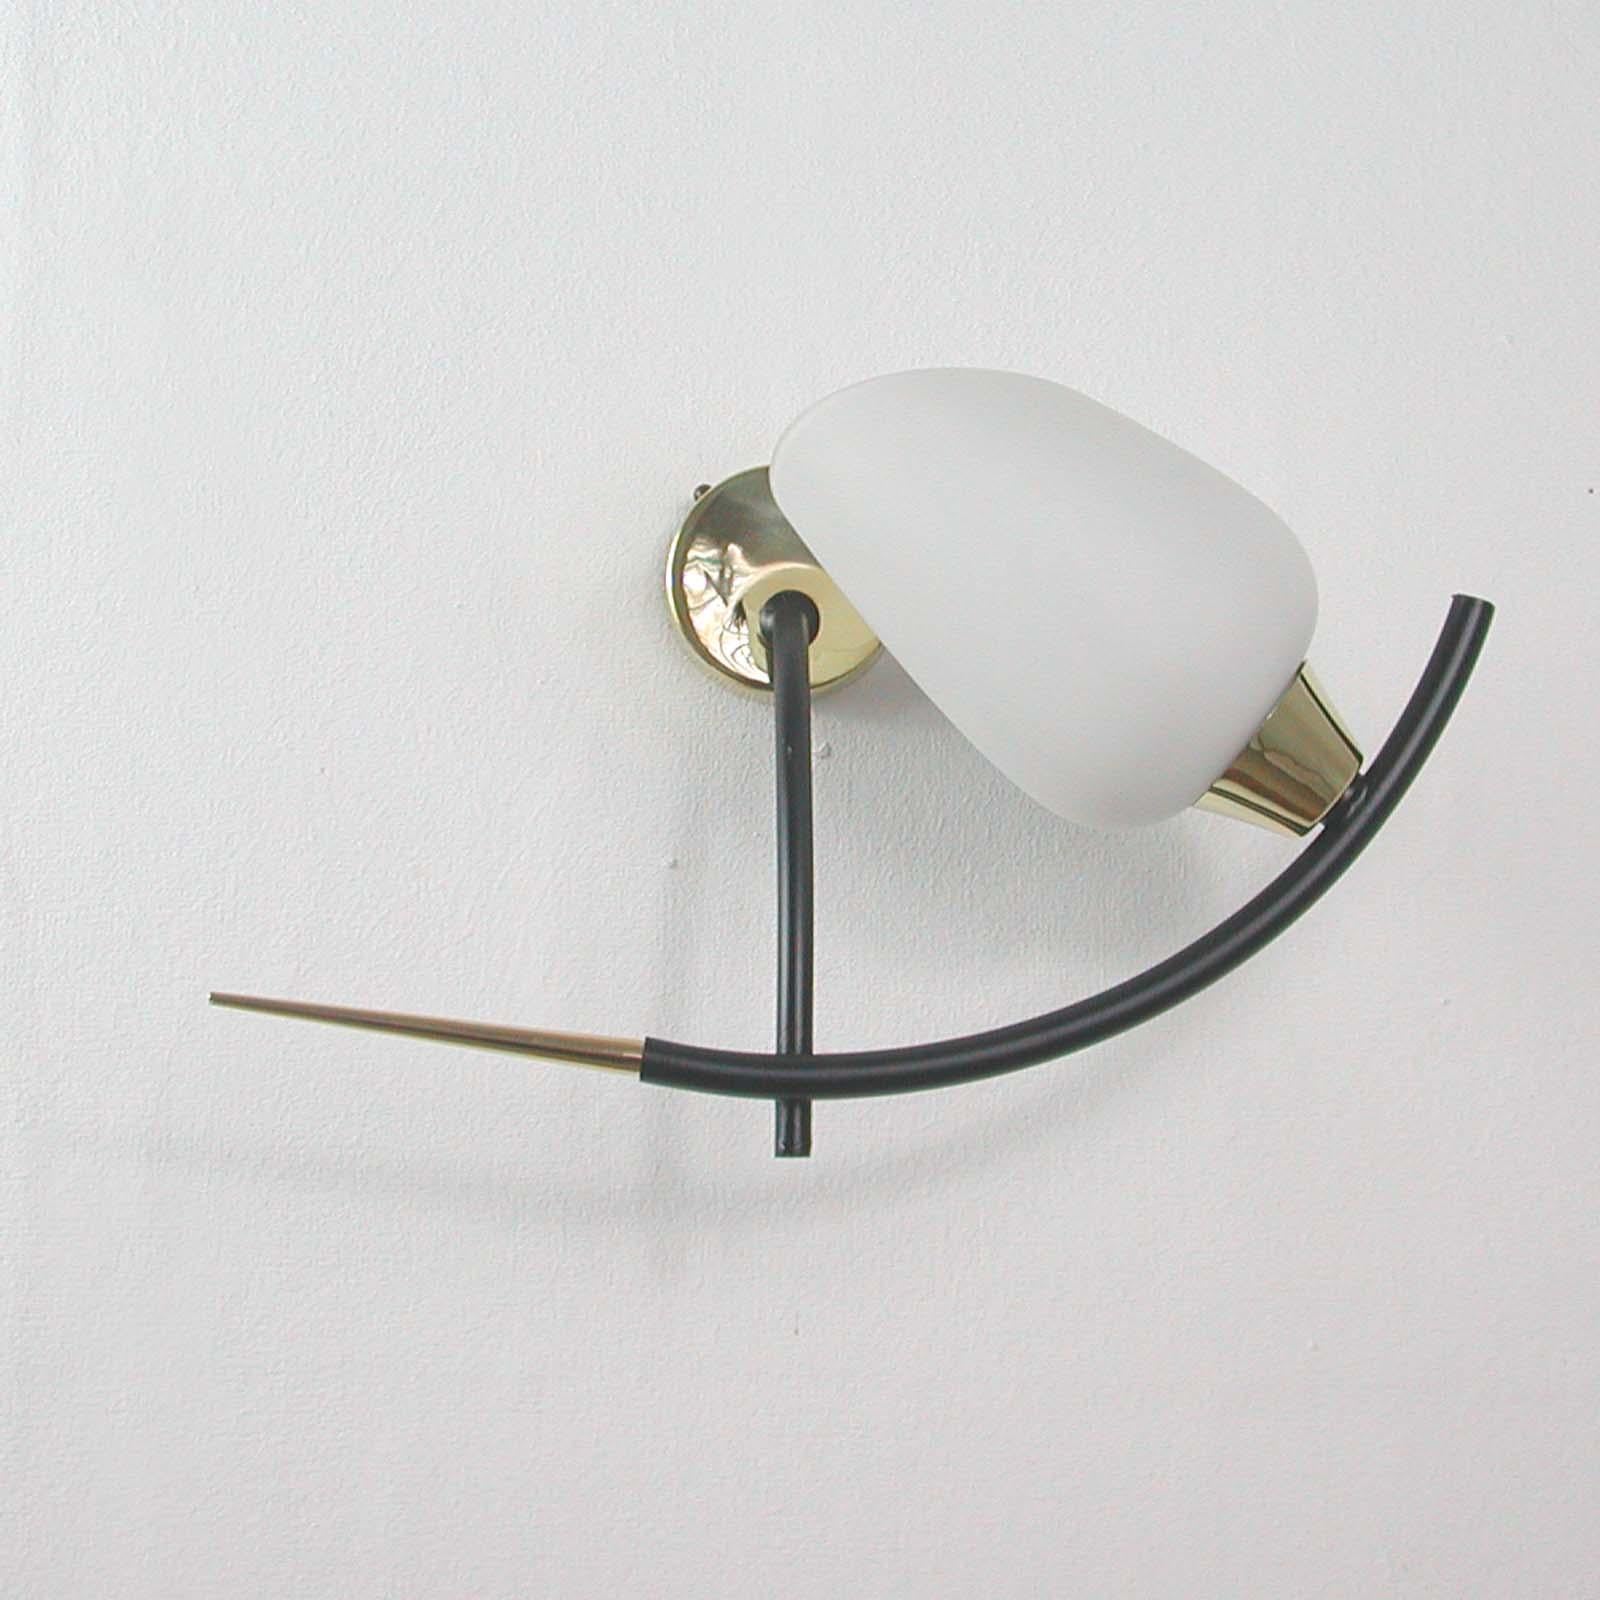 Metal Midcentury French Brass & Opaline Glass Sconces by Maison Arlus, 1950s For Sale